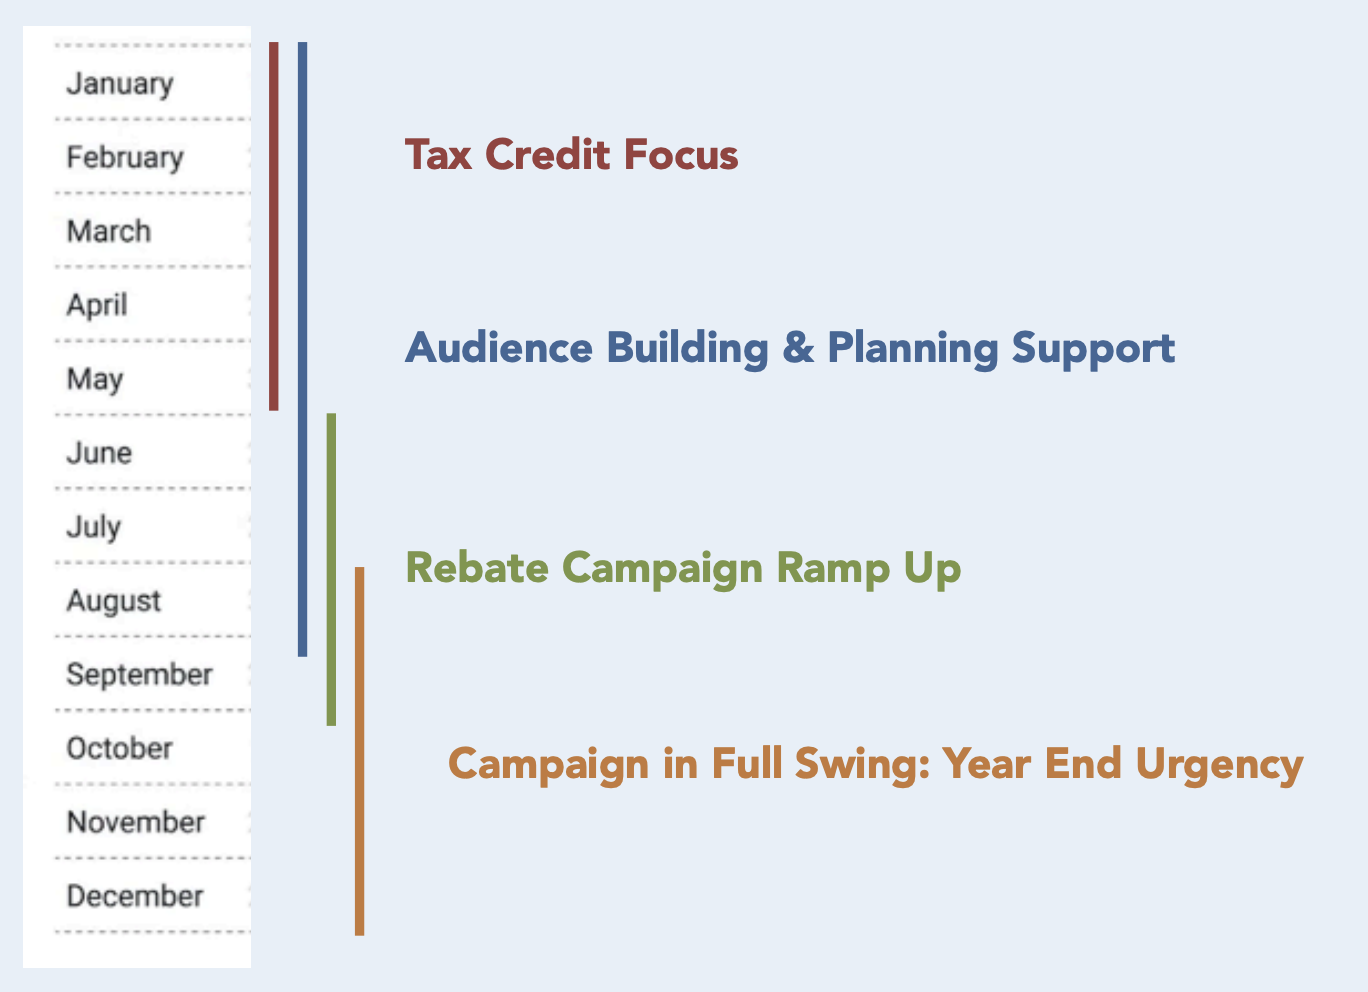 IRA rebate rollout timeline